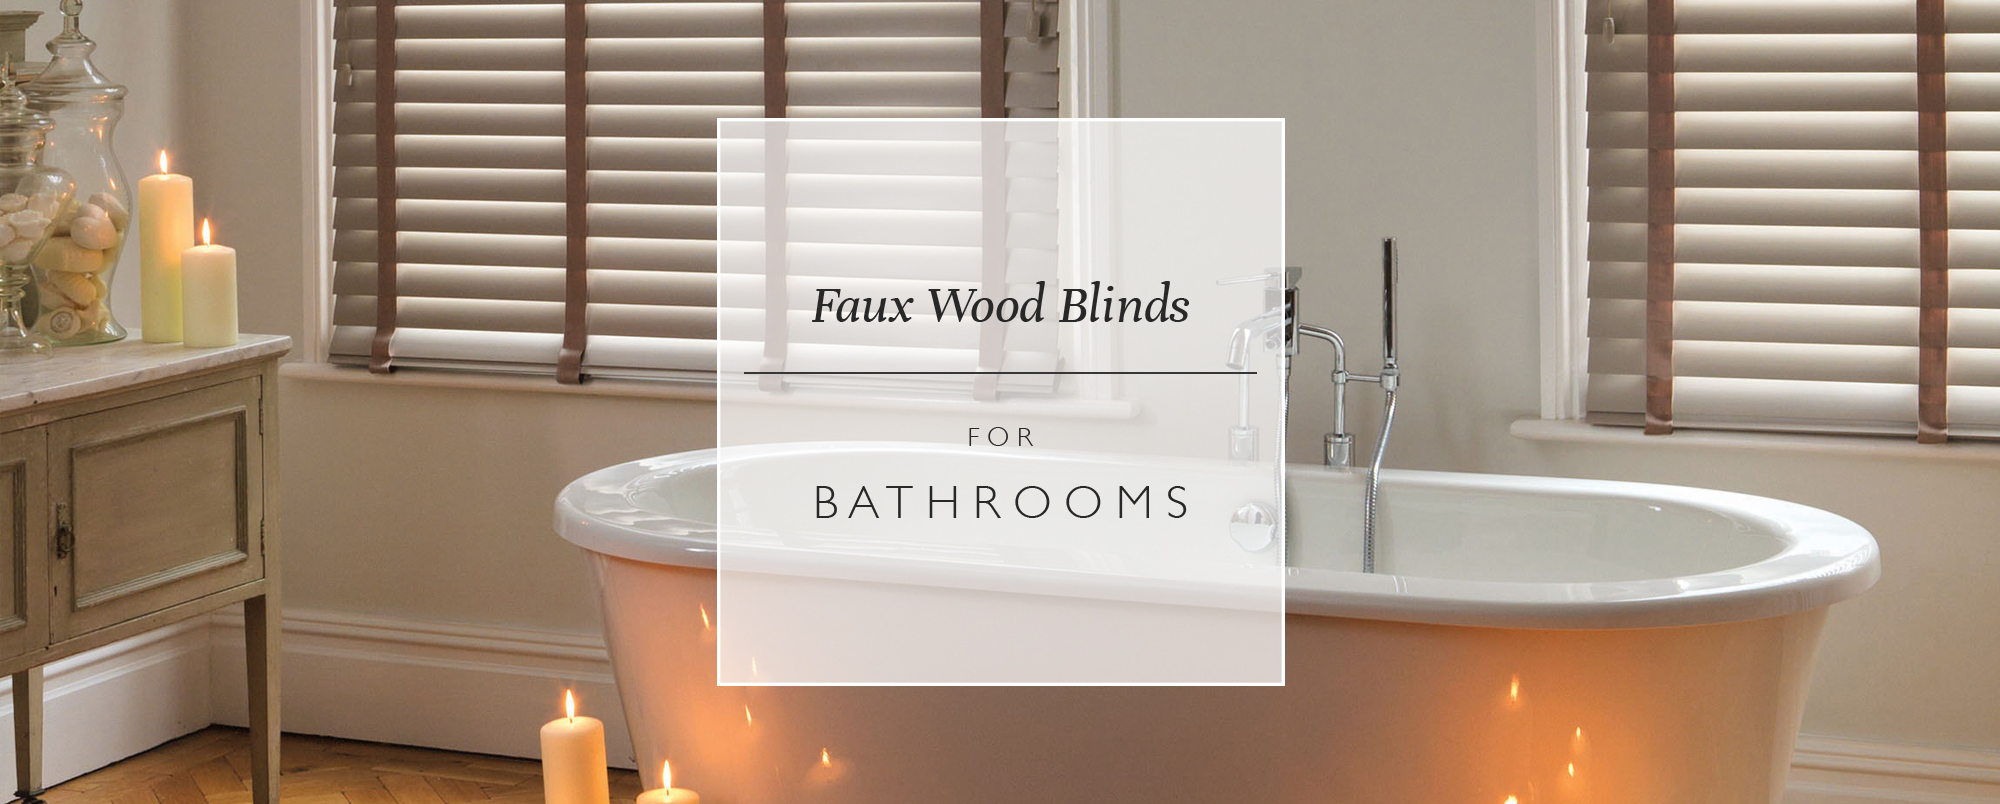 Faux Wood Blinds For Bathrooms, Bathroom Wooden Blinds